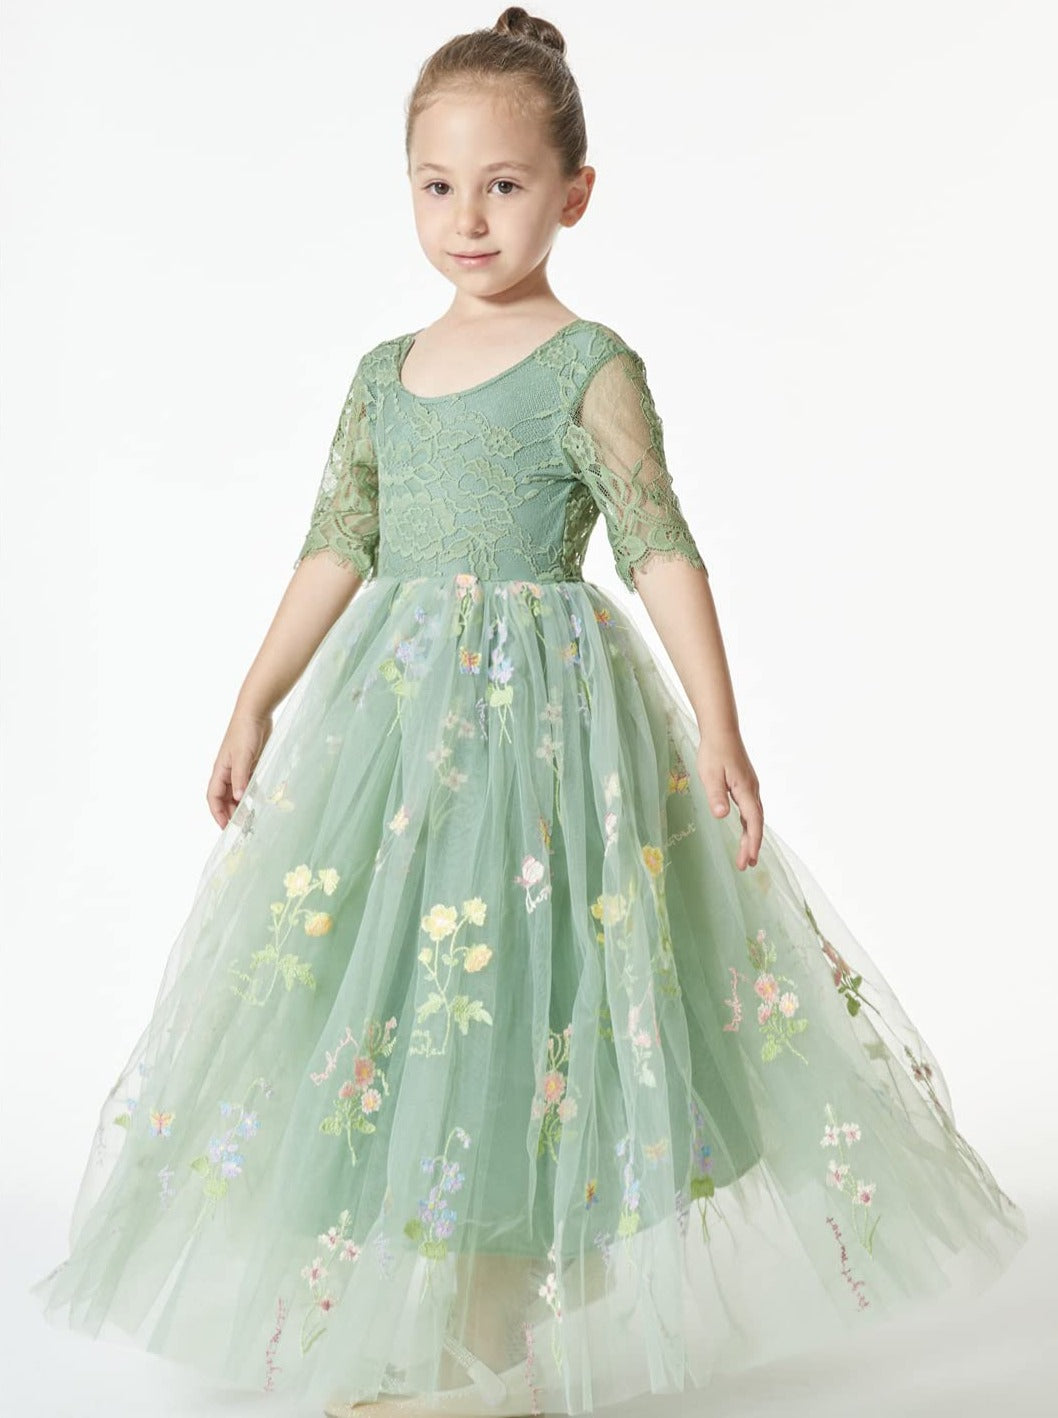 Floral Embroidered Tulle Lace Girl Dress in Sage